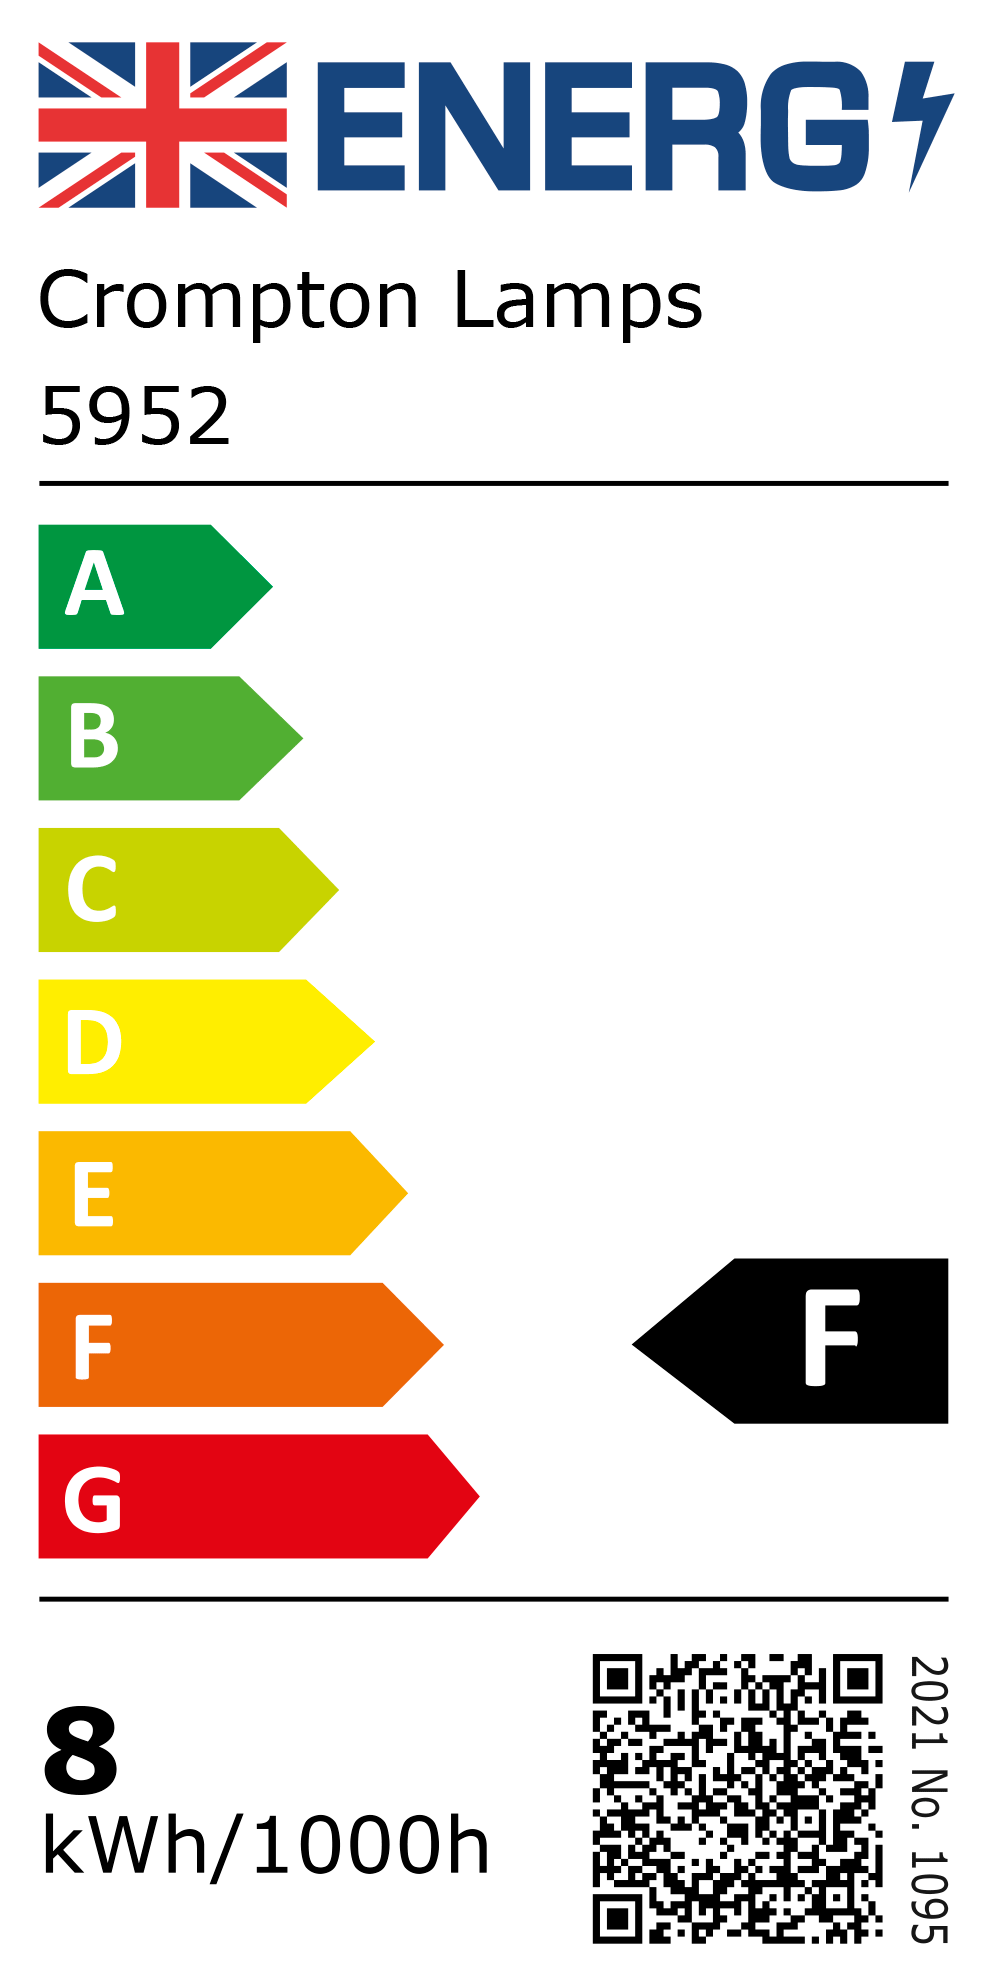 New 2021 Energy Rating Label: Stock Code 5952